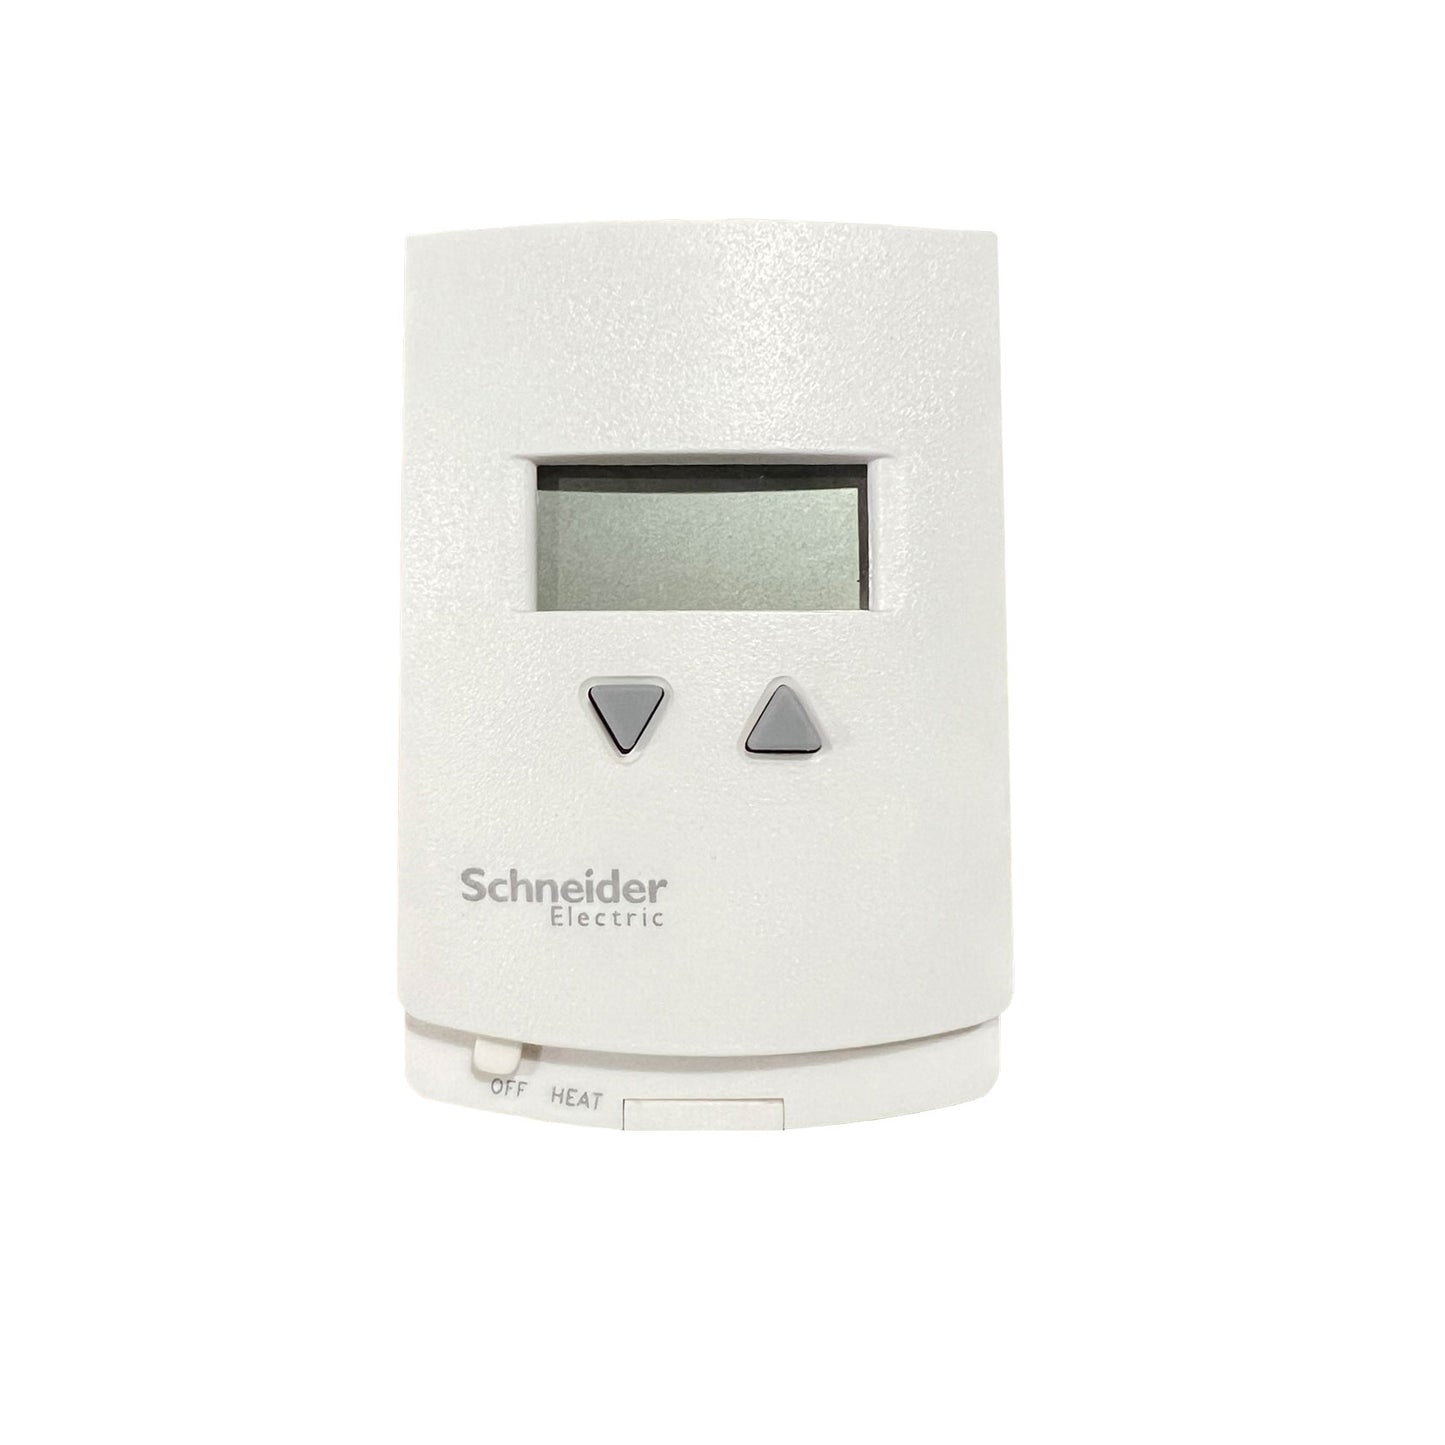 Erie T201-FP - Heating Only Digital Thermostat with Freeze Protection